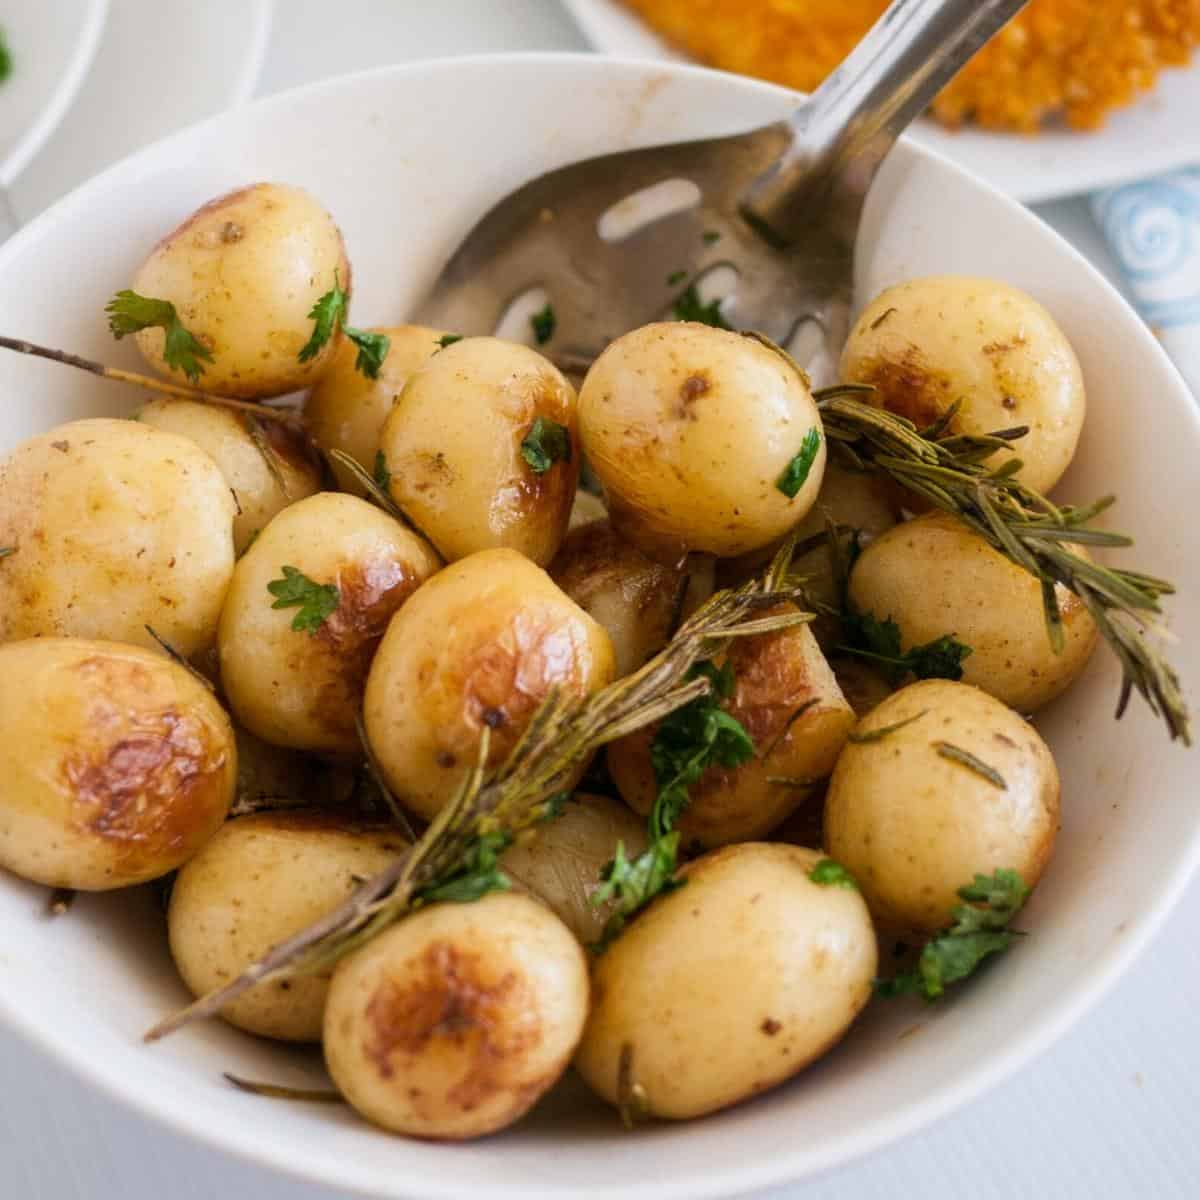 A white bowl with roast potatoes